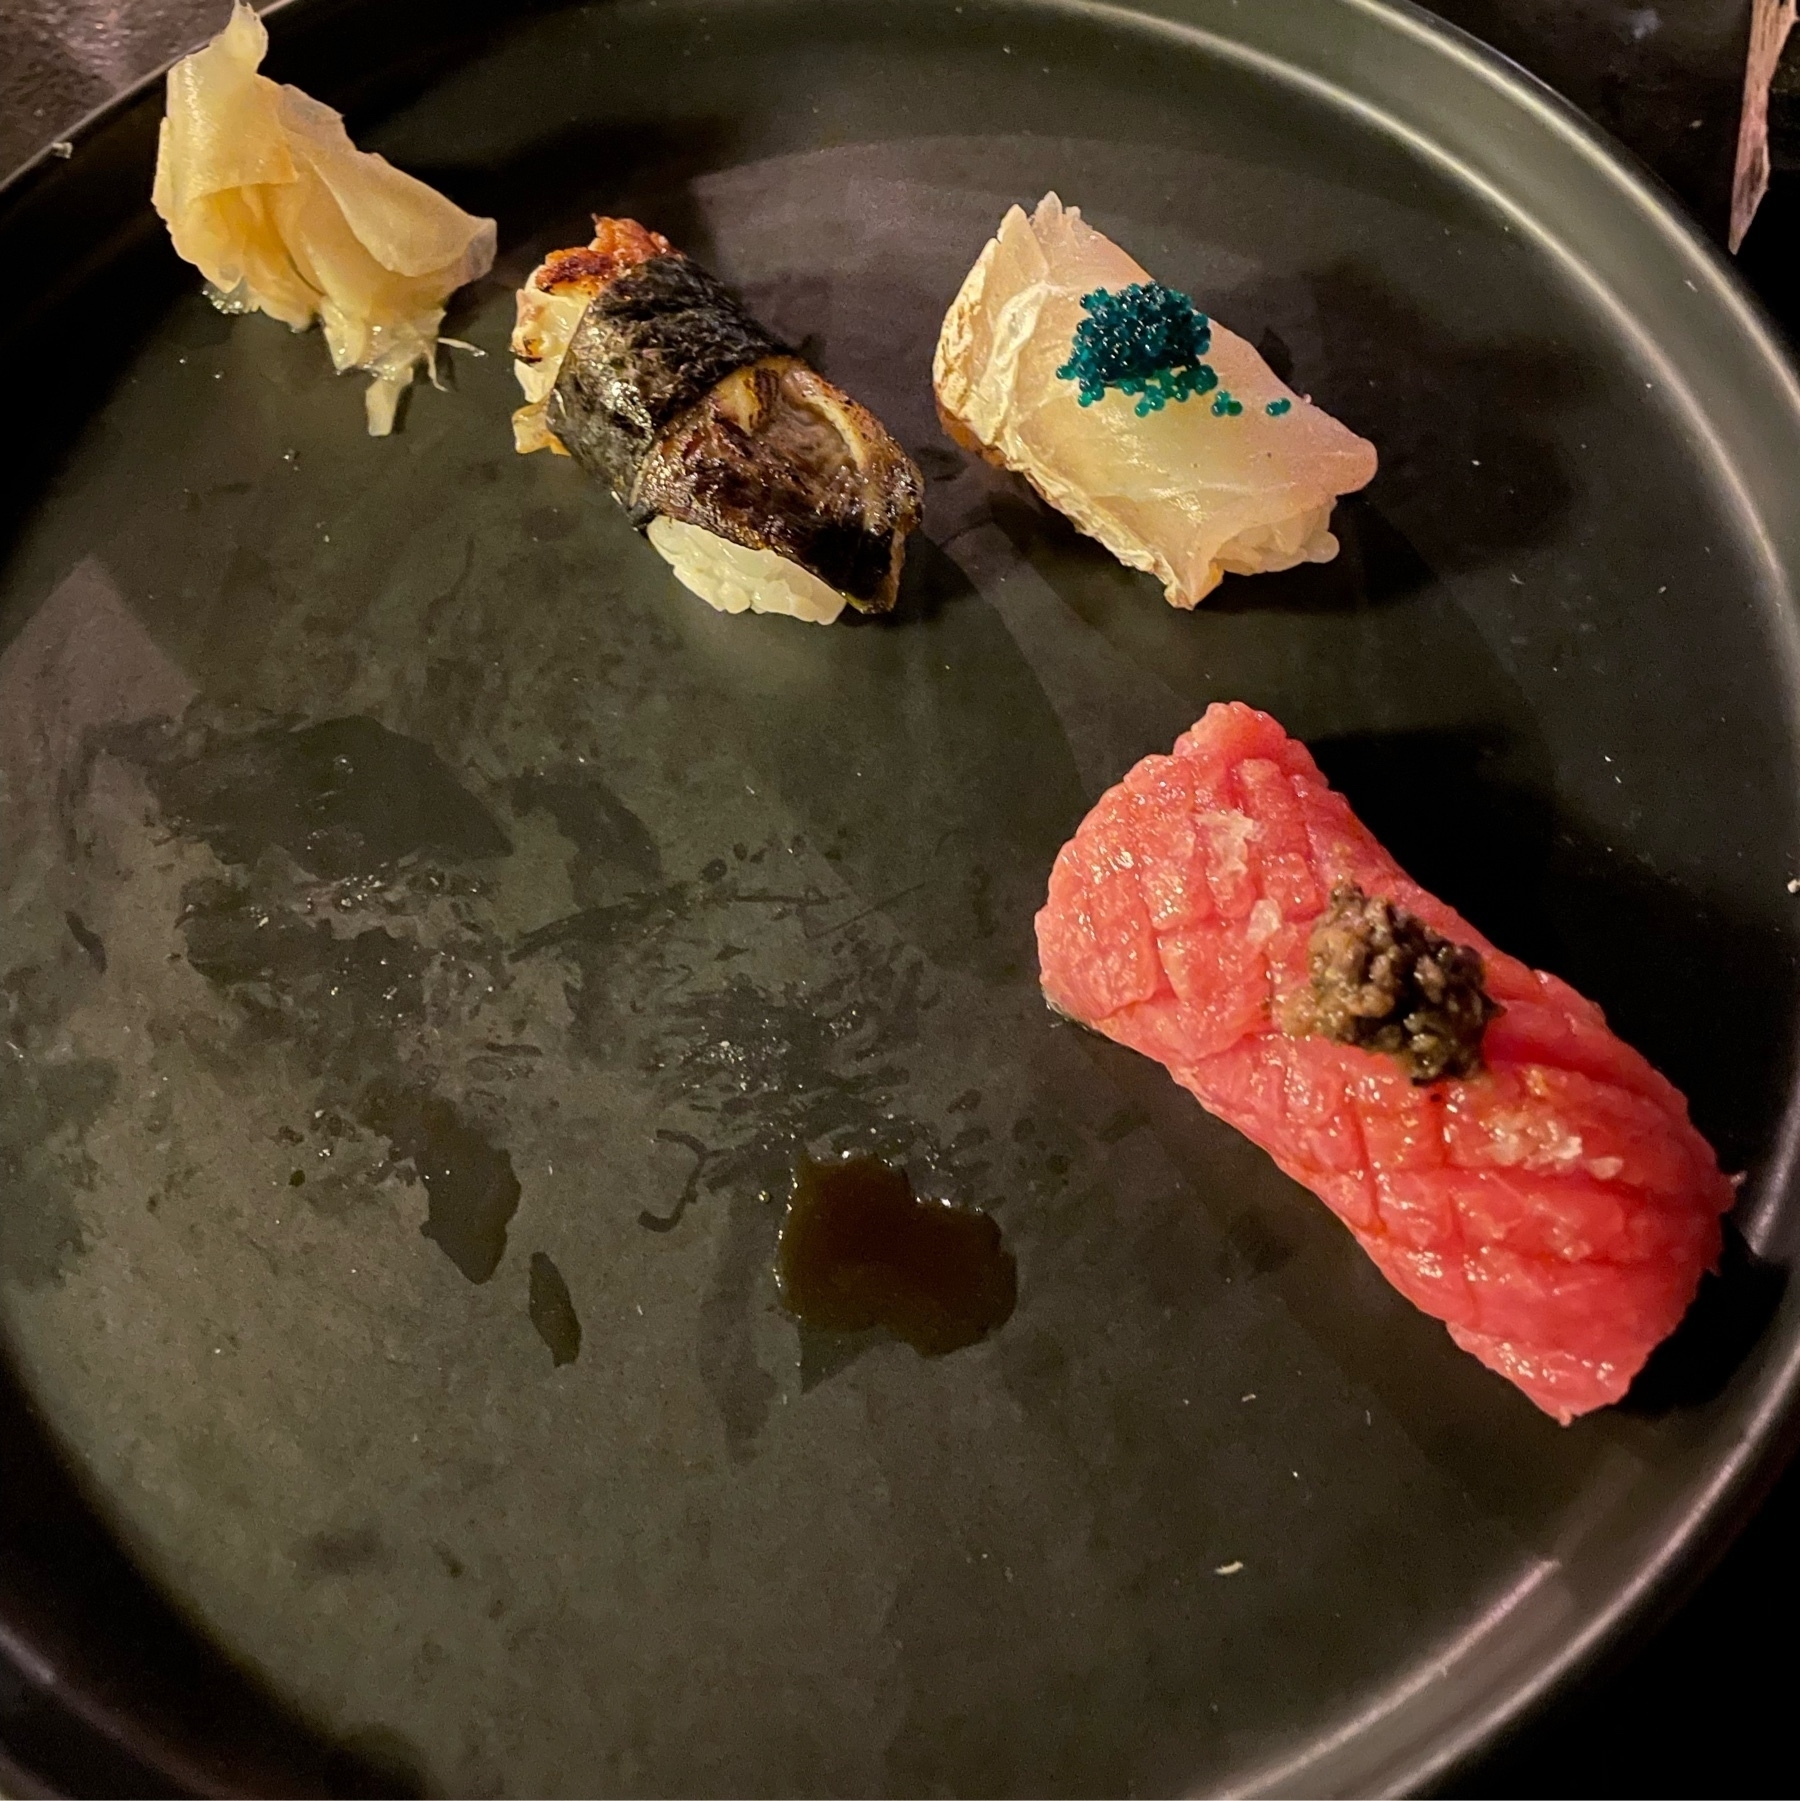 Although it's missing two pieces, there are three remaining pieces of nigiri.